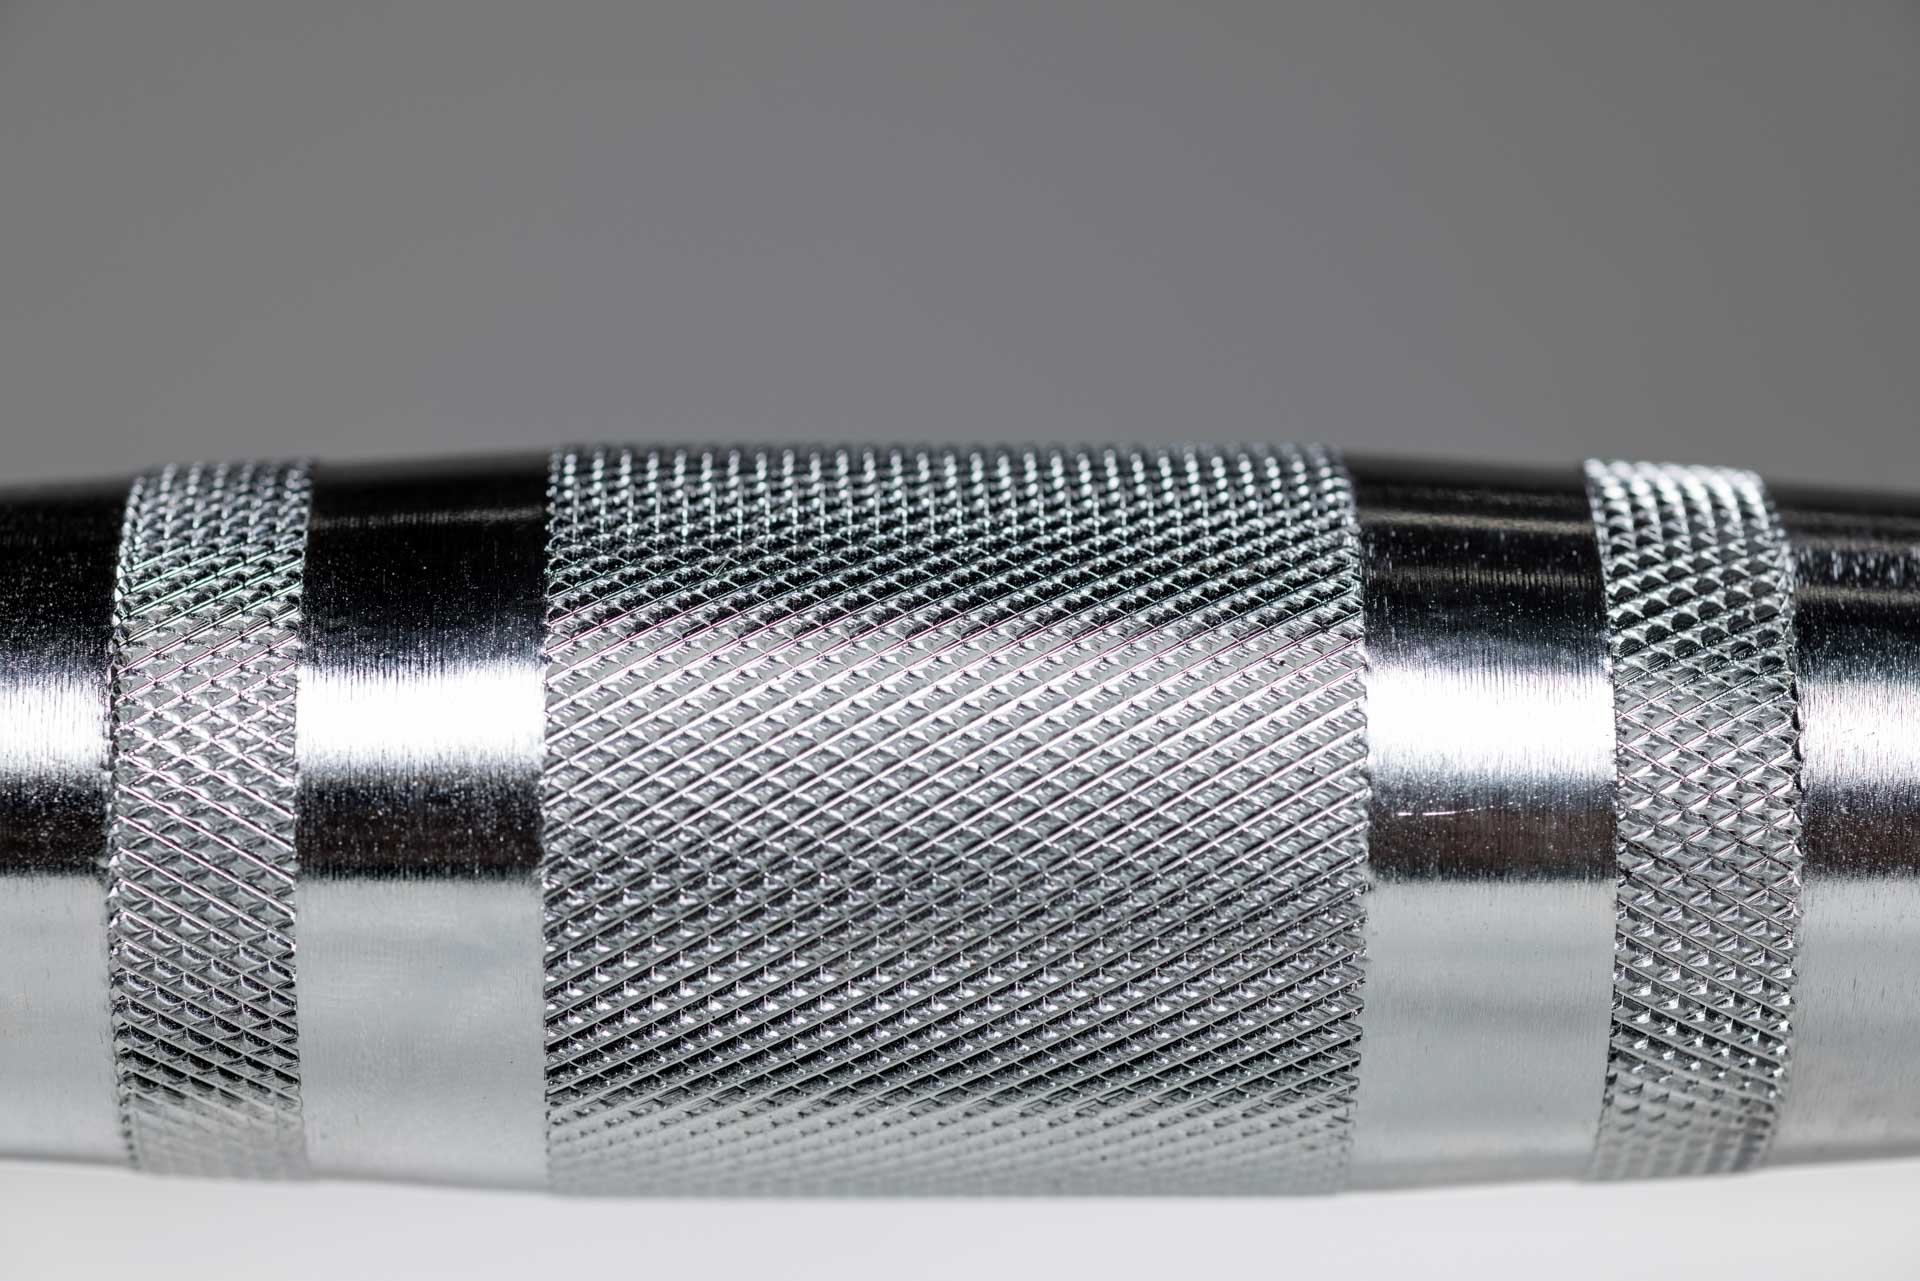 Close-up view of the knurled ergonomic handle of a REP Ergo Hex Dumbbell.